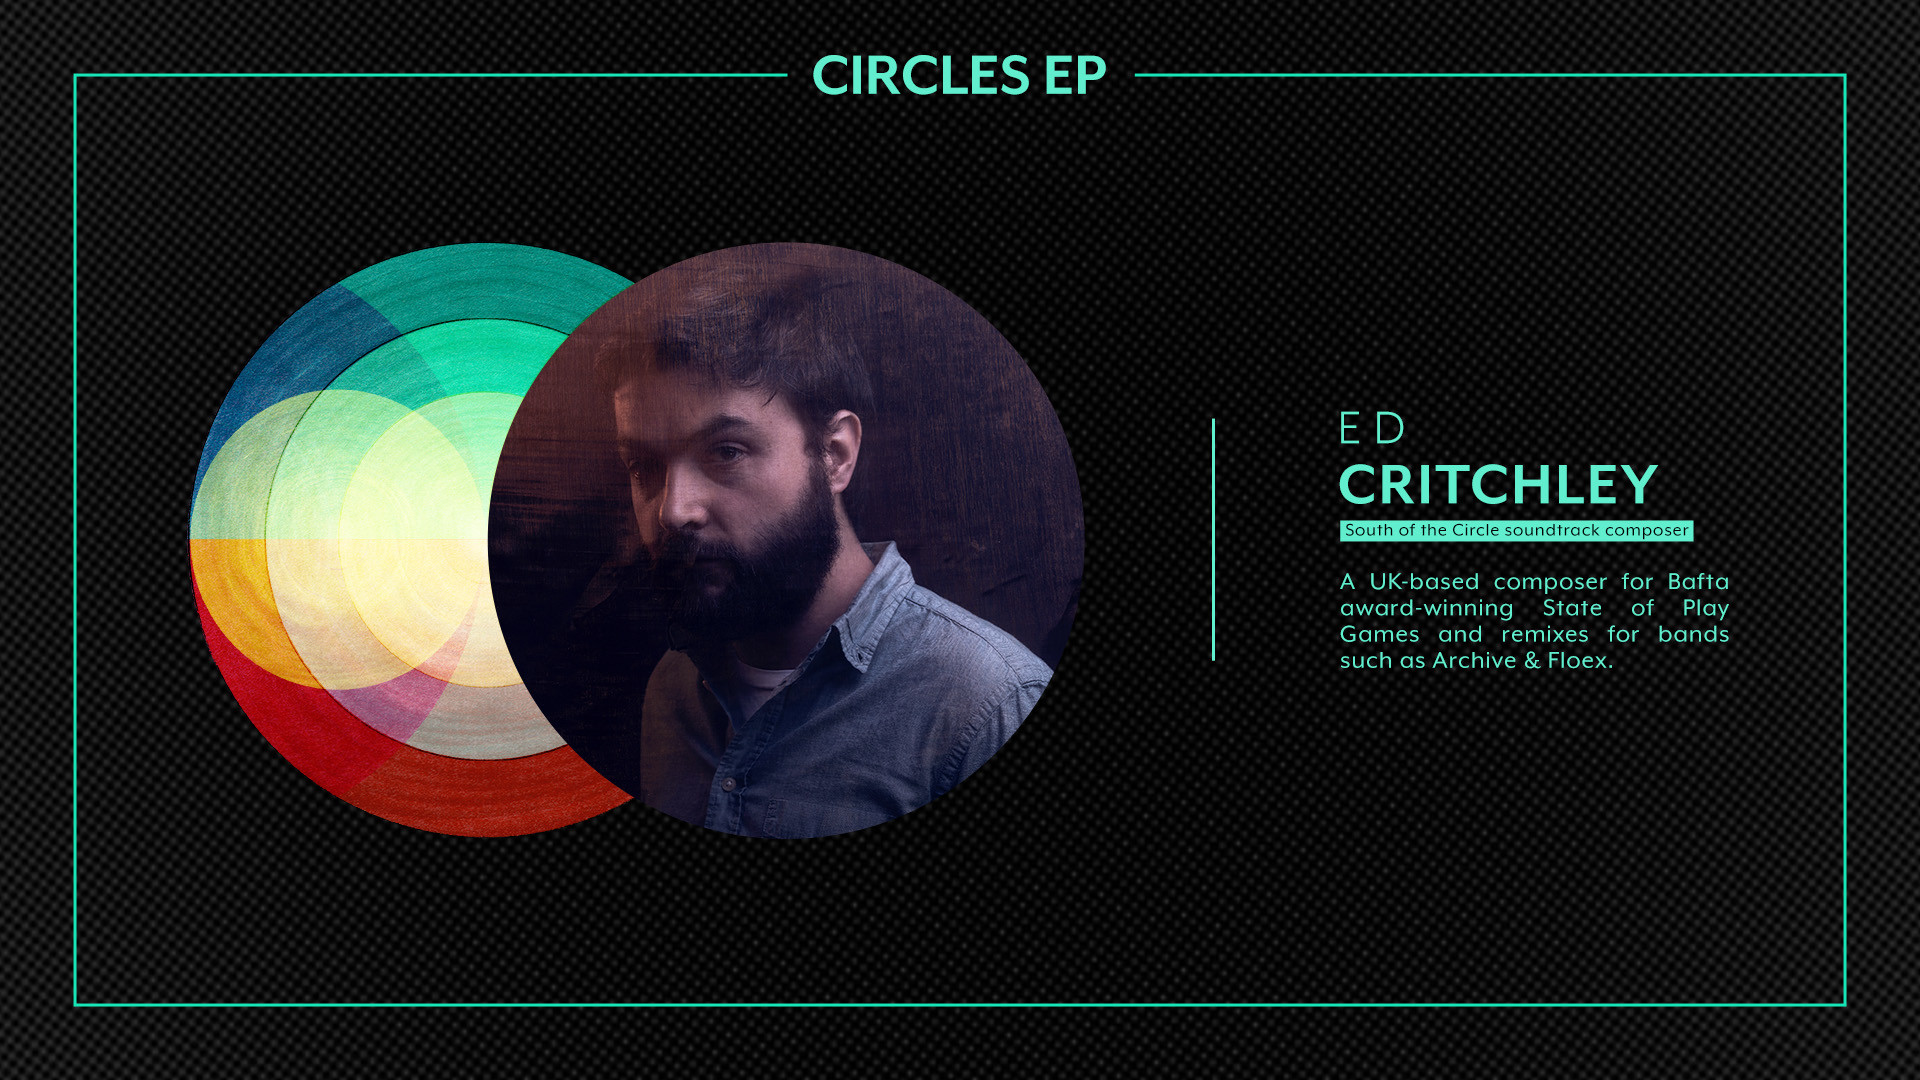 Circles EP: South of the Circle Edition Featured Screenshot #1